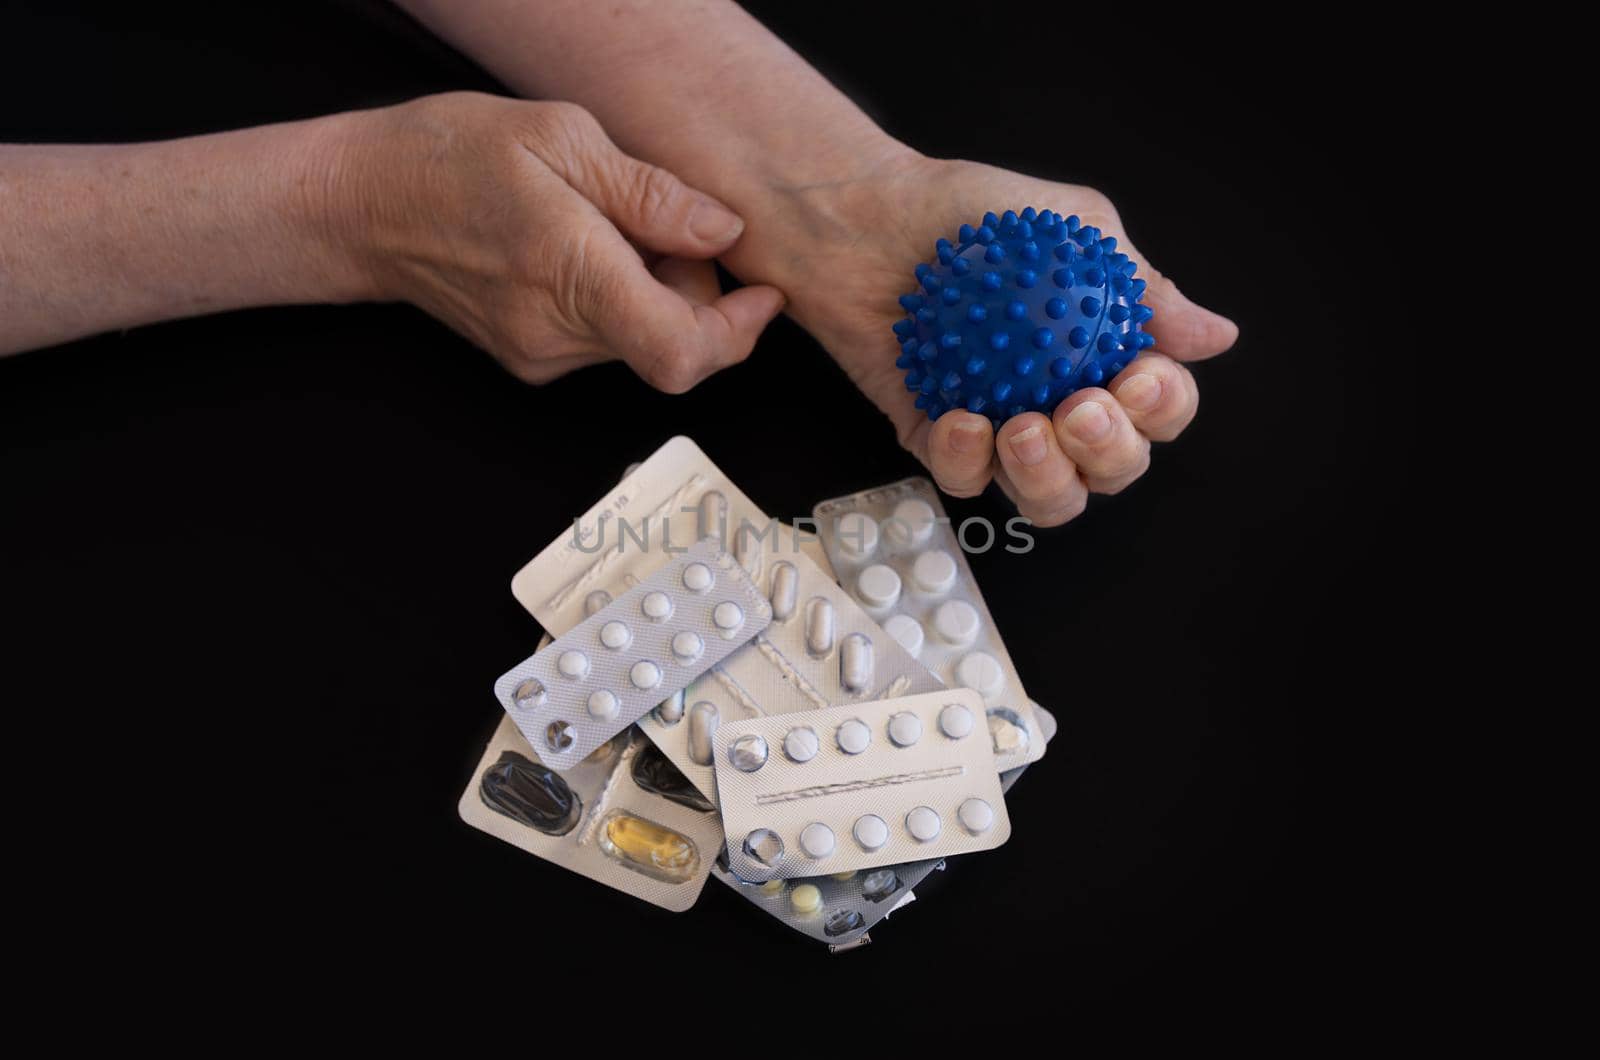 close-up, the hands of elderly woman perform self-massage exercises with prickly blue ball against the background of handful of pills. The concept of alternative medicine, the prevention of diseases